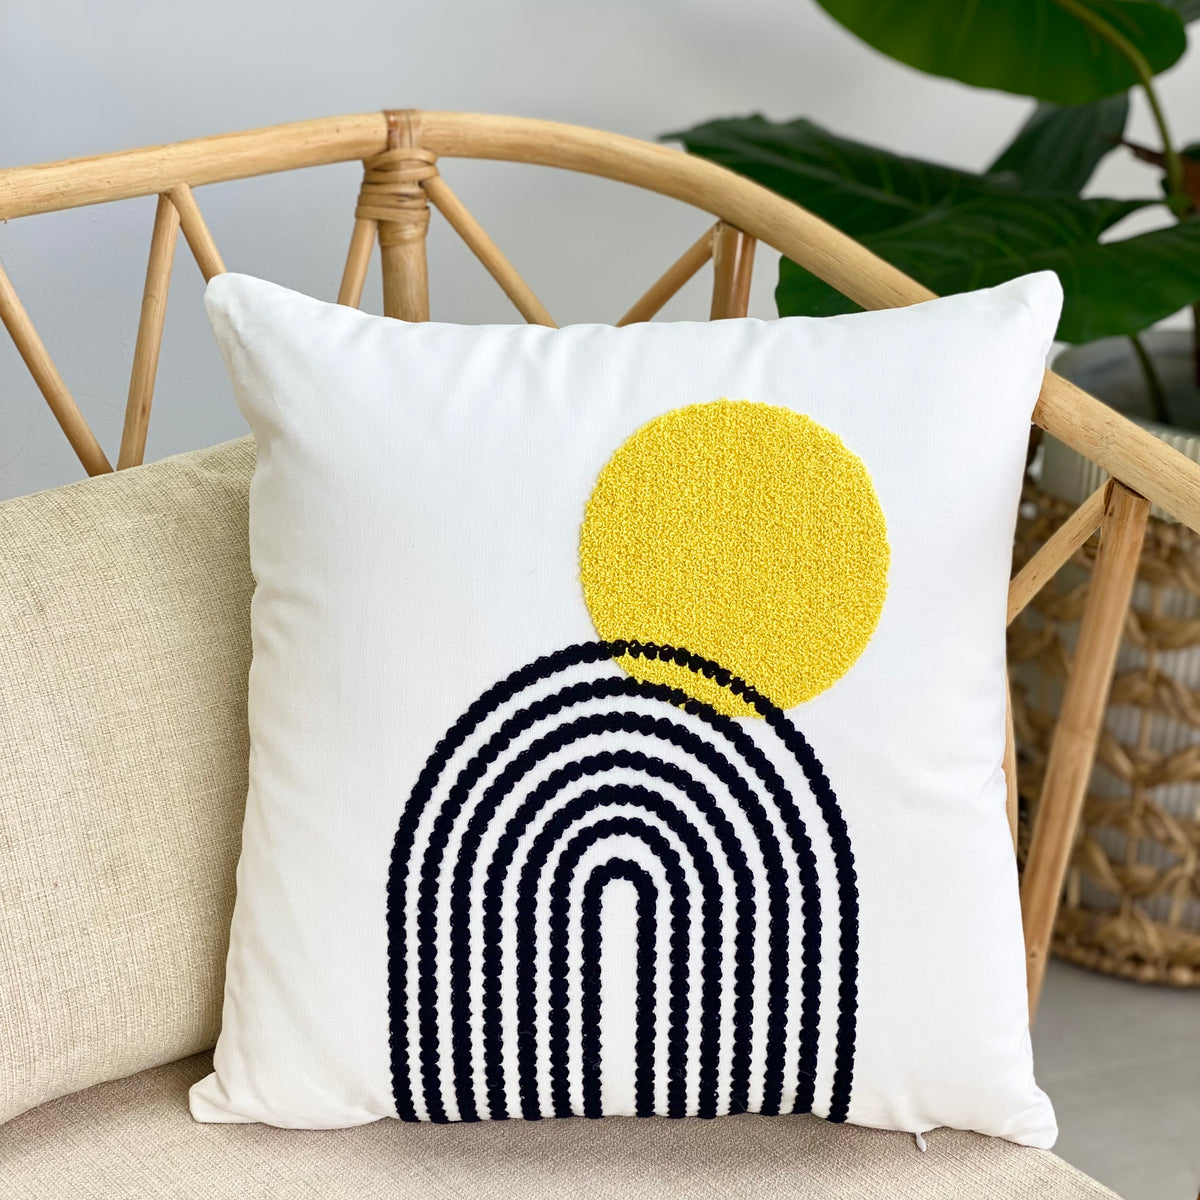 Embroidered Sunset Pillow